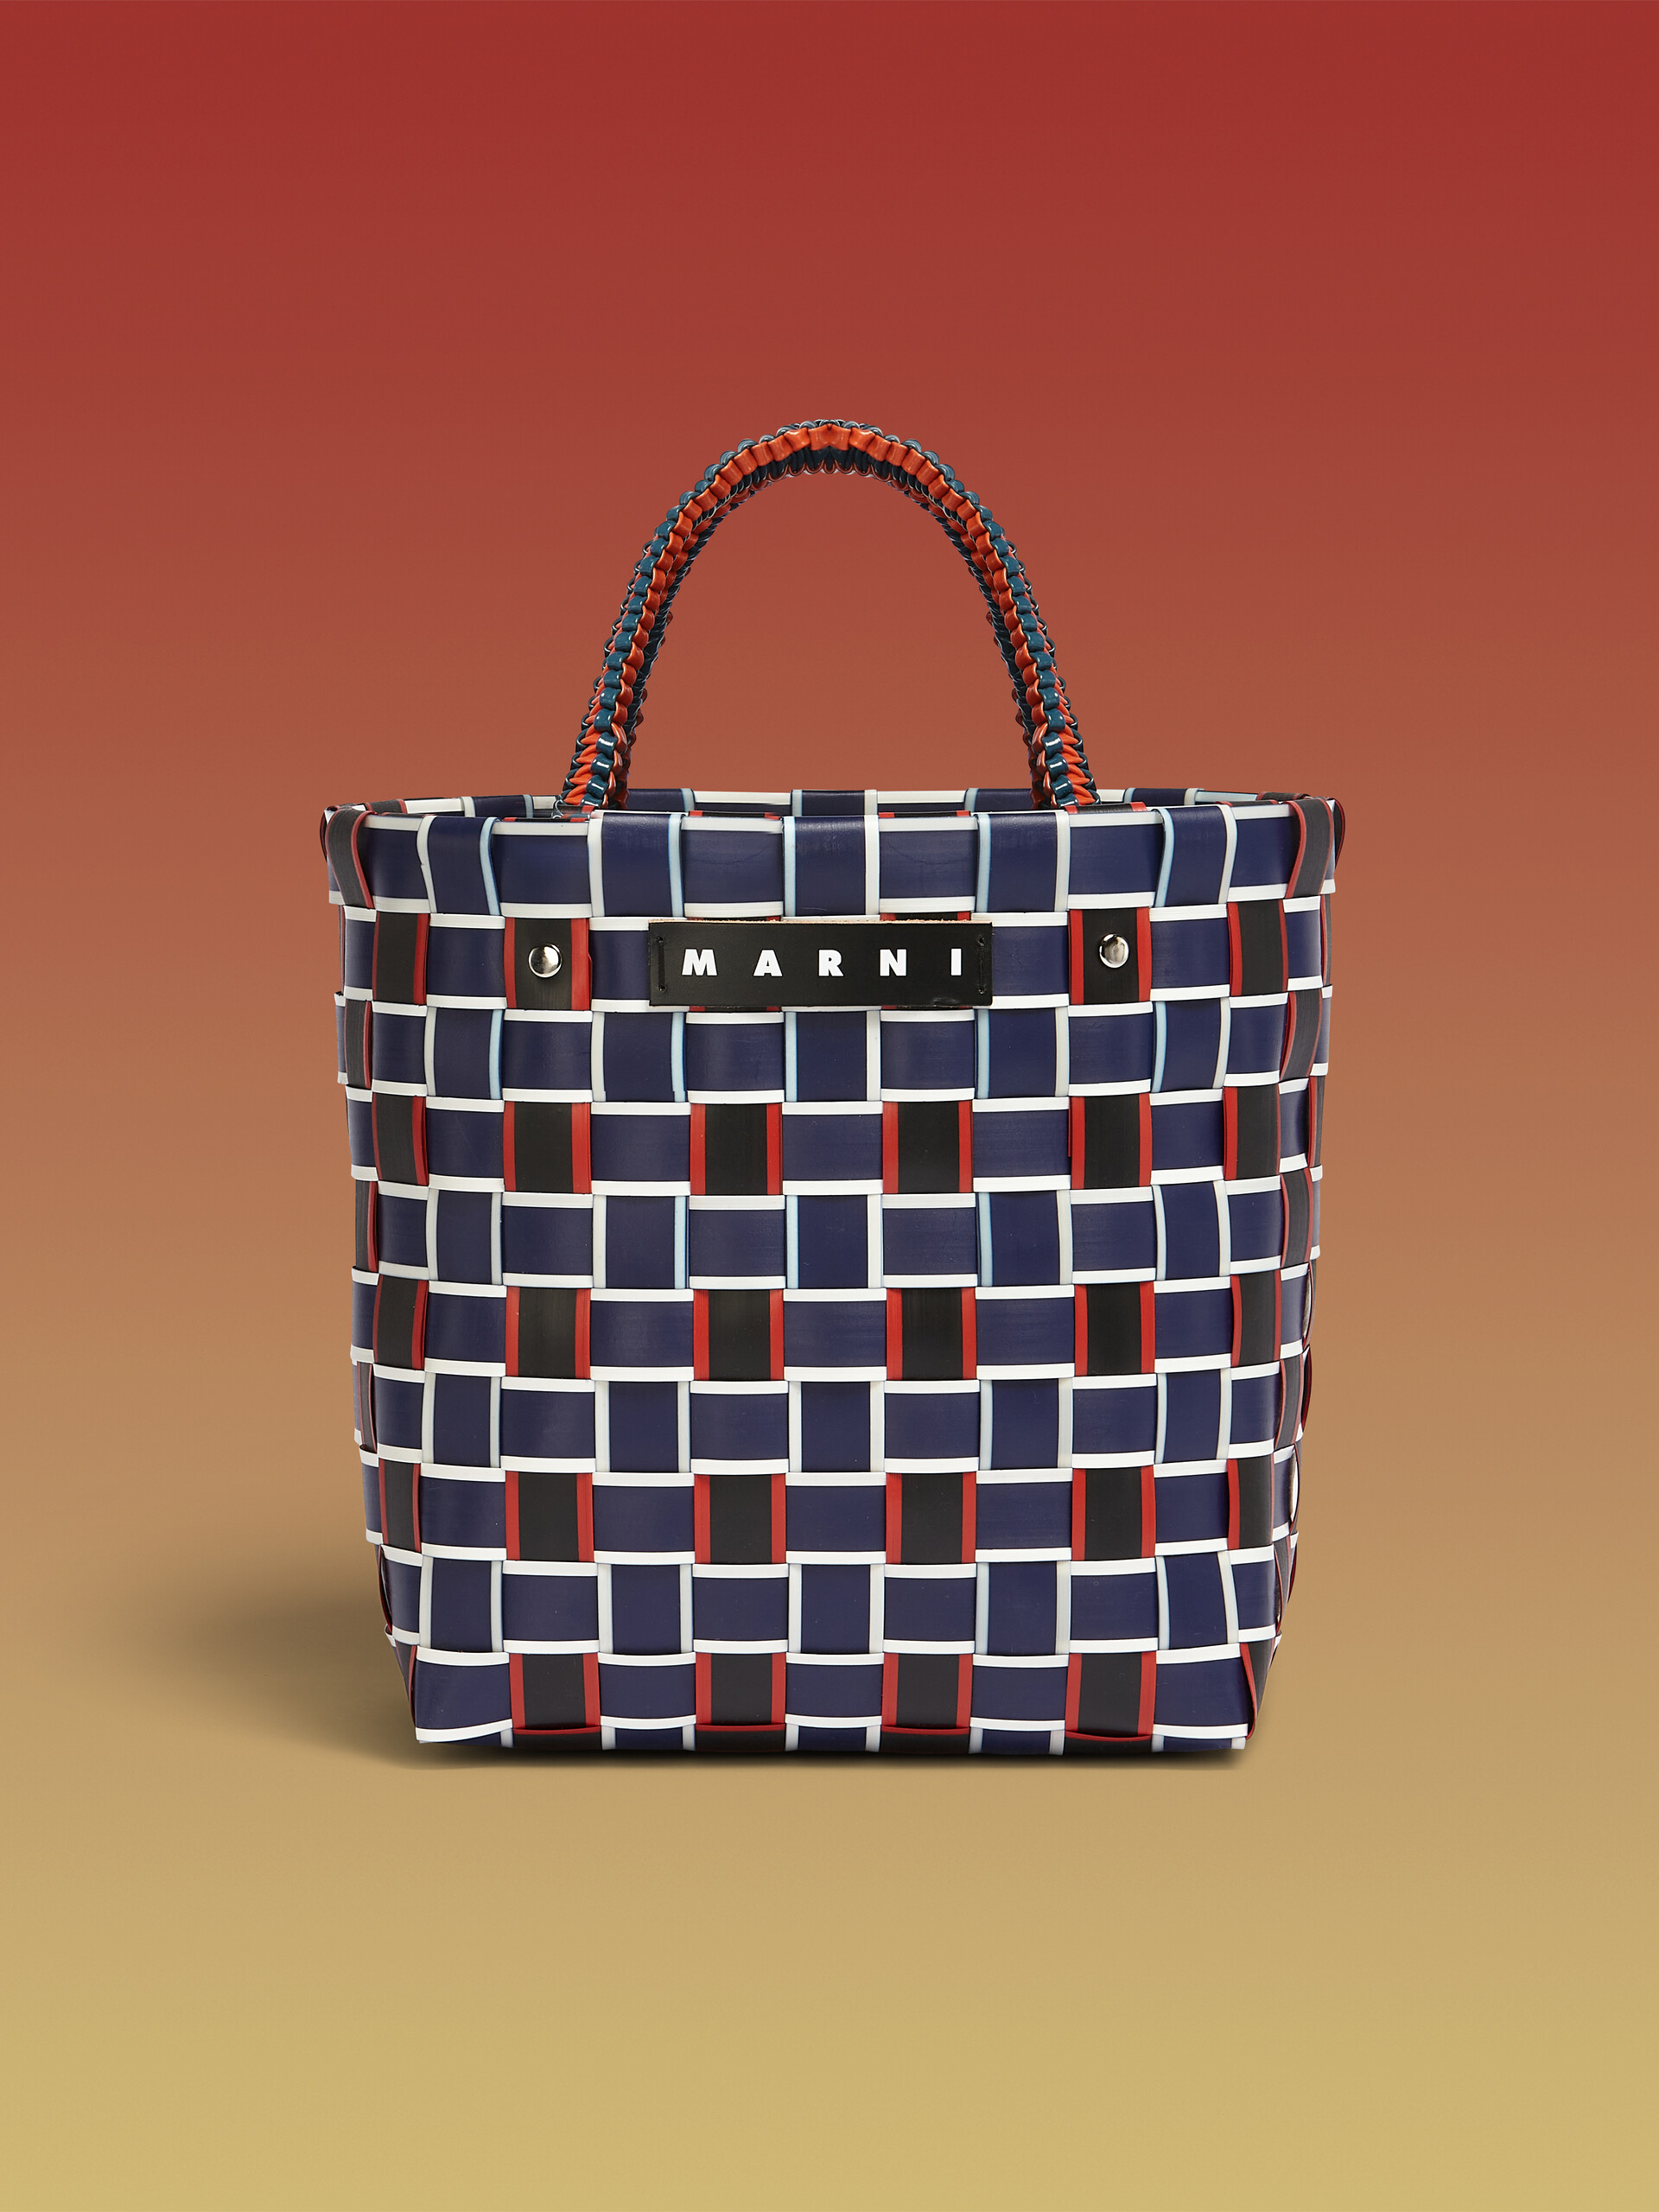 MARNI MARKET TAPE BASKET bag in orange and black woven material - Shopping Bags - Image 1